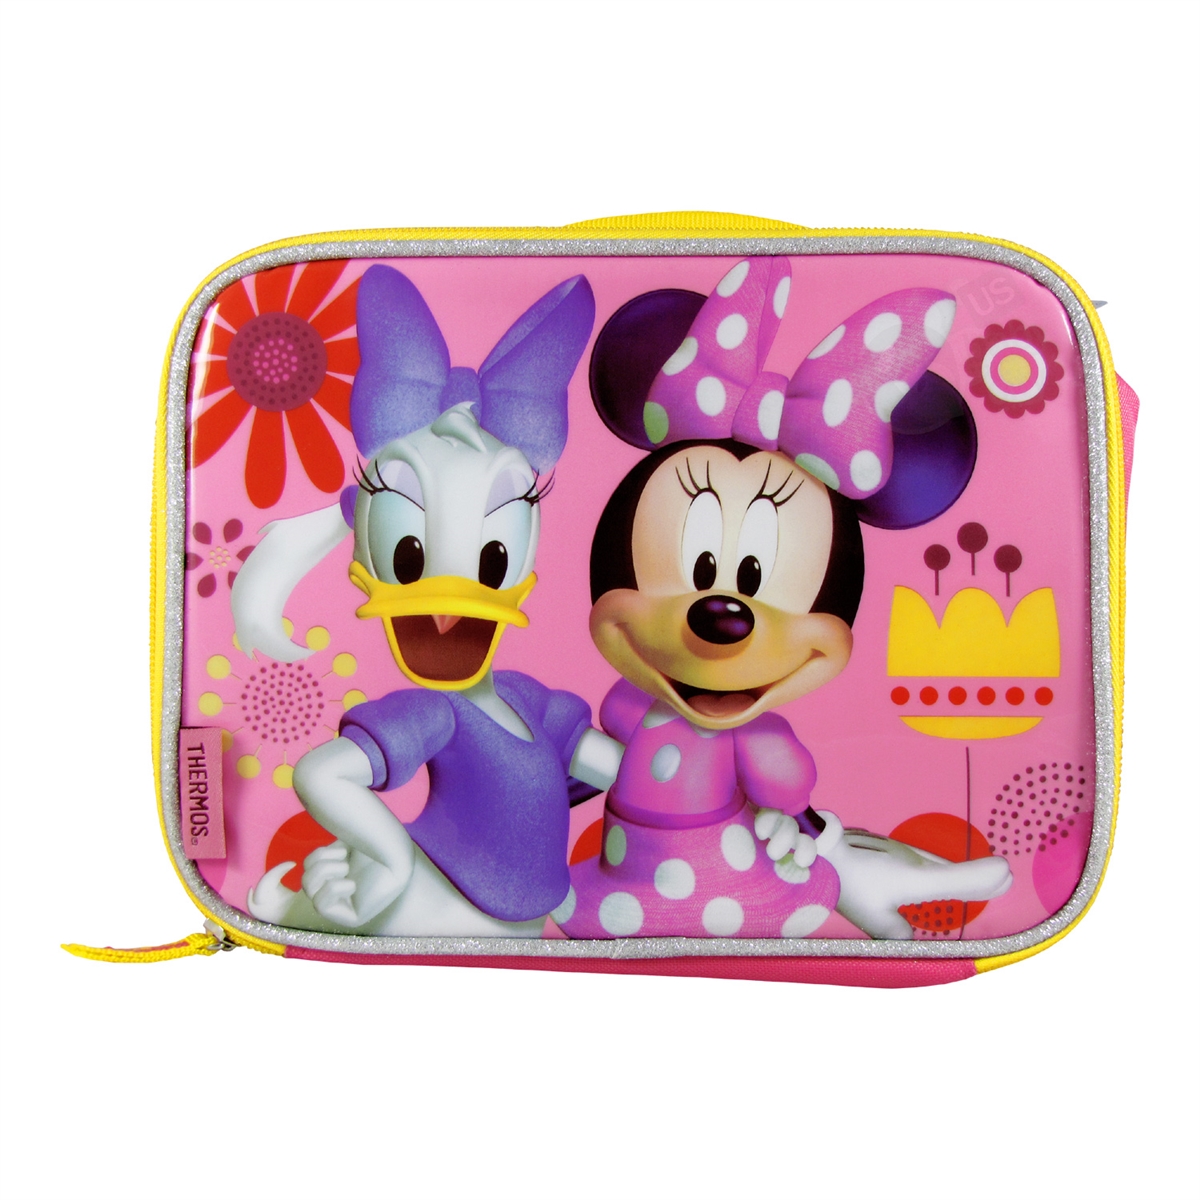 Minnie Mouse Insulated Lunch Bags  Insulated Minnie Mouse Cooler